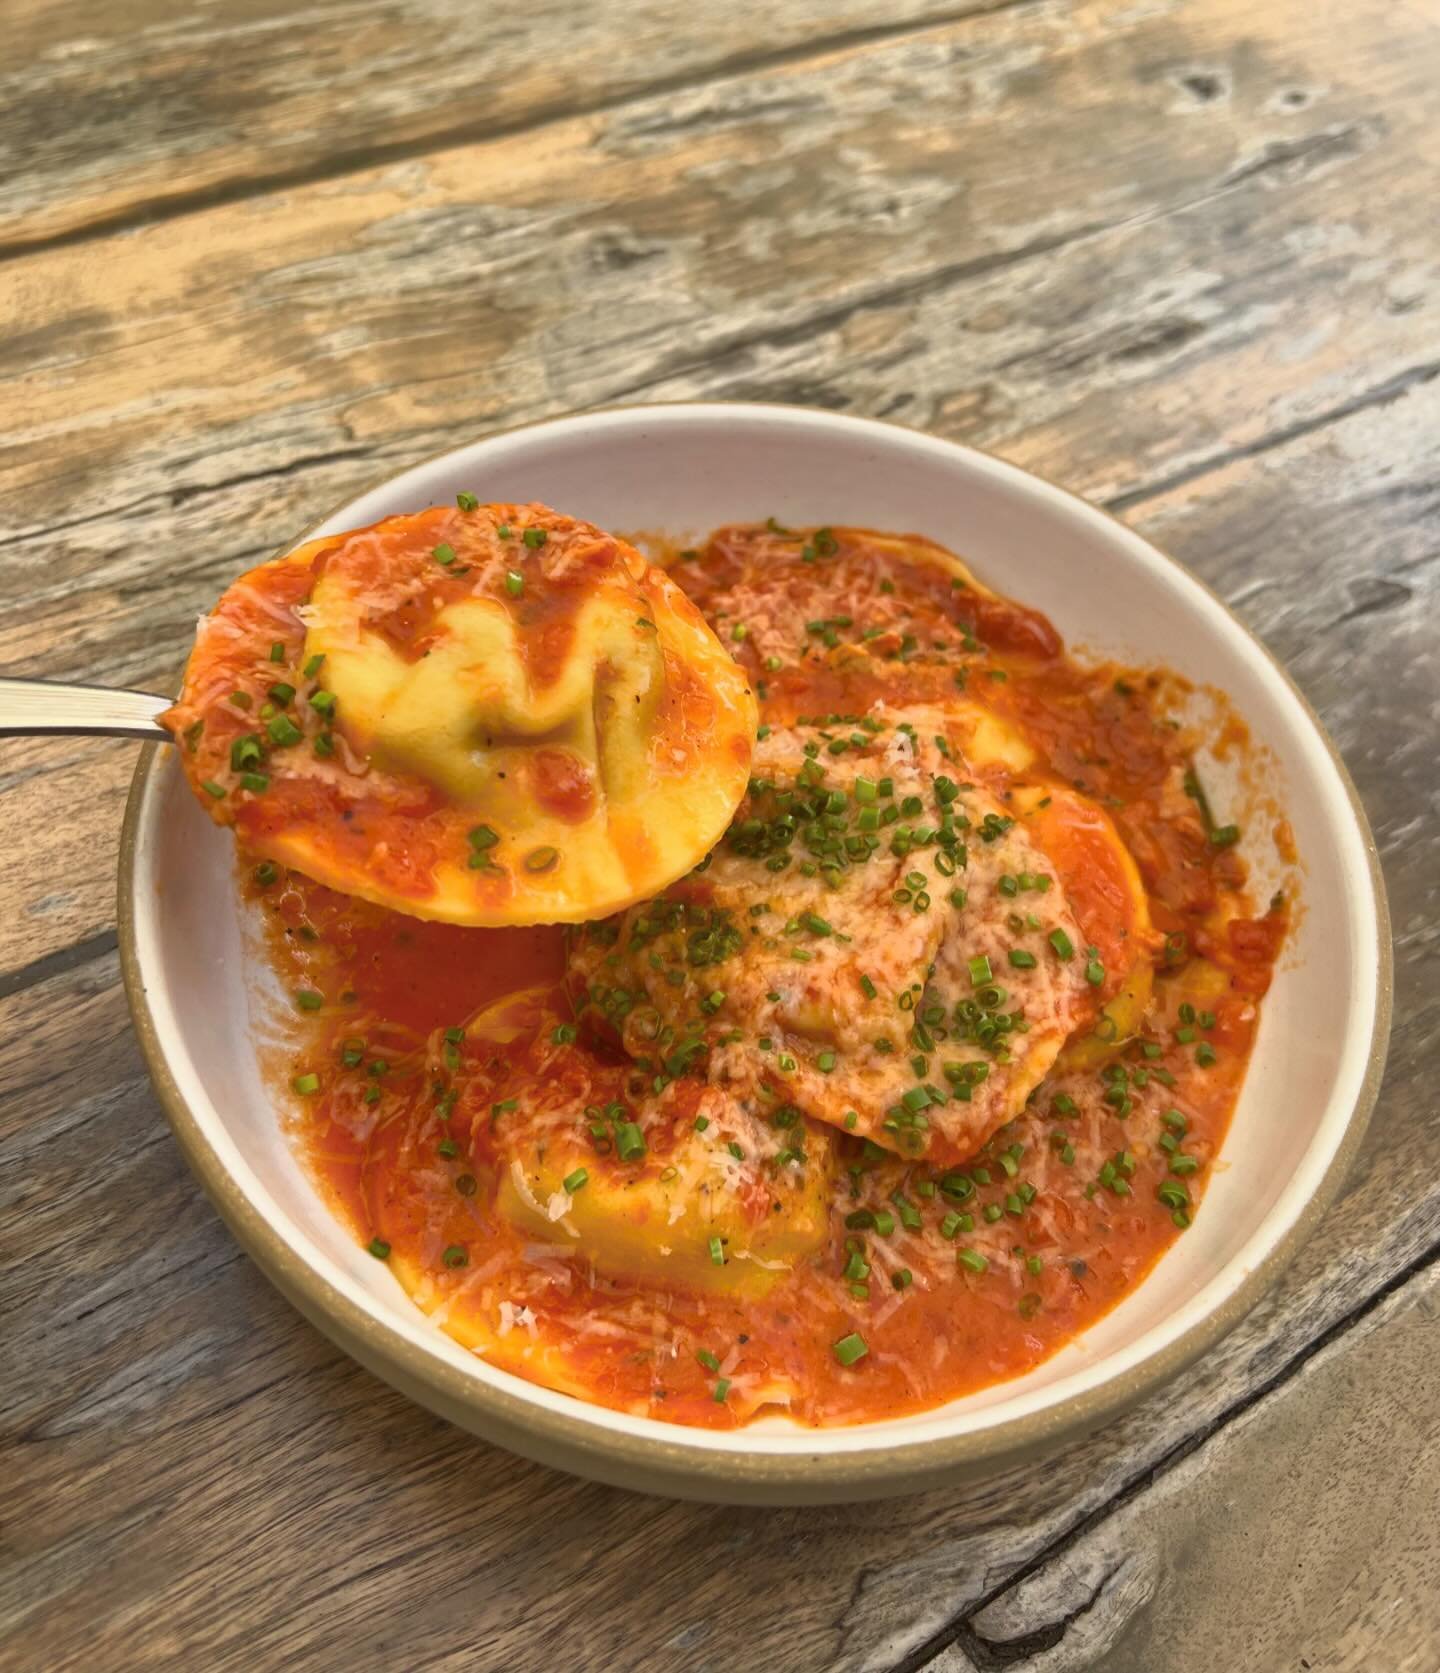 Pasta Wednesday Special! 🍝 

Ravioli stuffed with Fresh Mozzarella, Sausage, Herbs, Chili Flakes and Garlic in a Marinara Sauce topped with Parmigiano Reggiano. 

Tonight only!

Our Hours: 
Mon-Thurs 3-9pm.
Fri-Sat 12-10pm.
Sun 12-9pm.

See you here